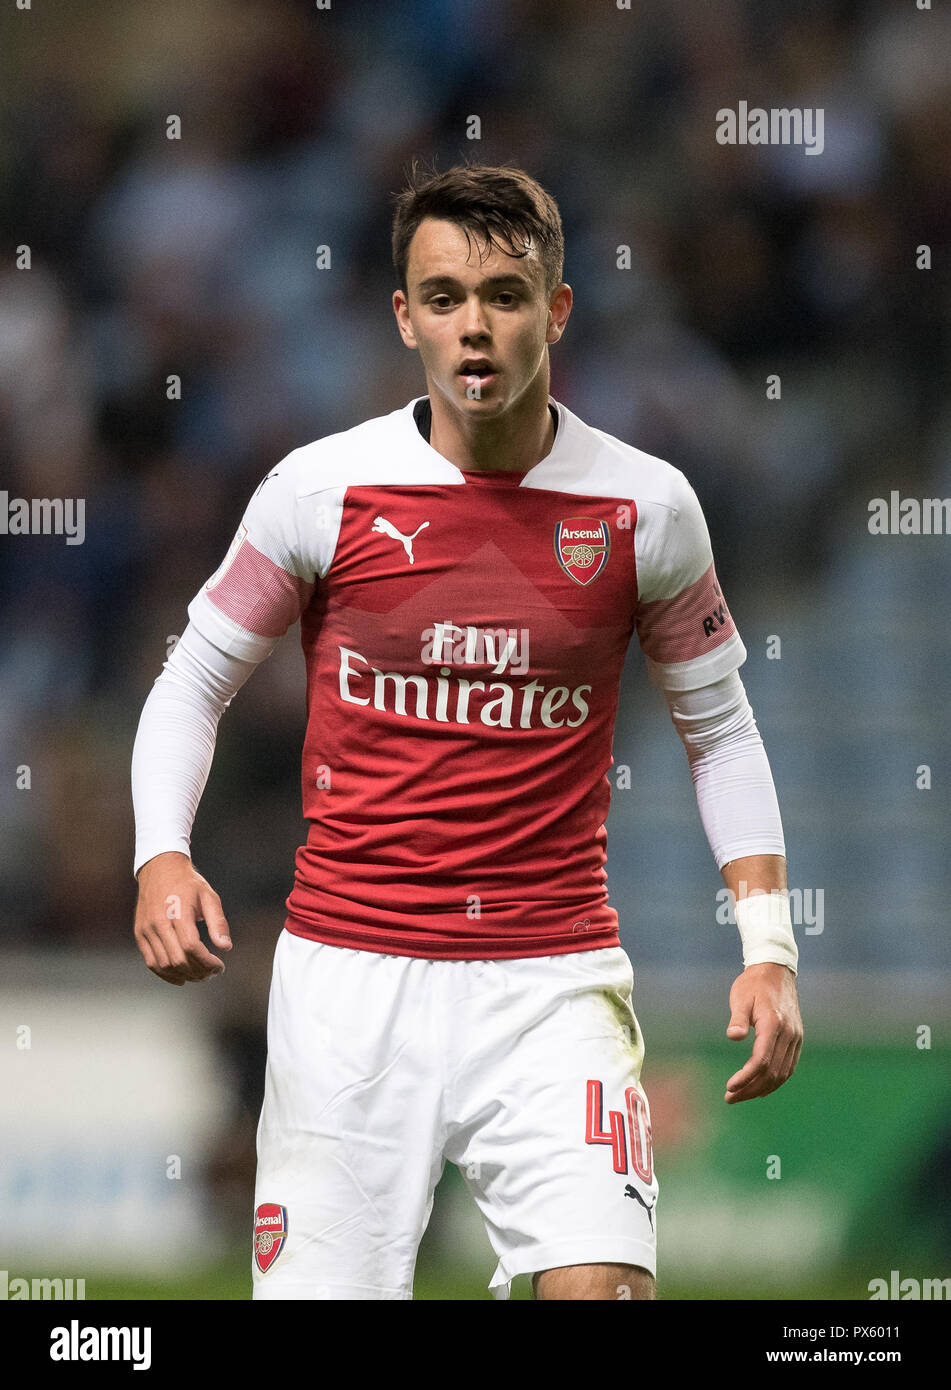 Robbie Burton of Arsenal U21 during the The Checkatrade Trophy group match  between Coventry City and Arsenal U21 at the Ricoh Arena, Coventry, England  Stock Photo - Alamy